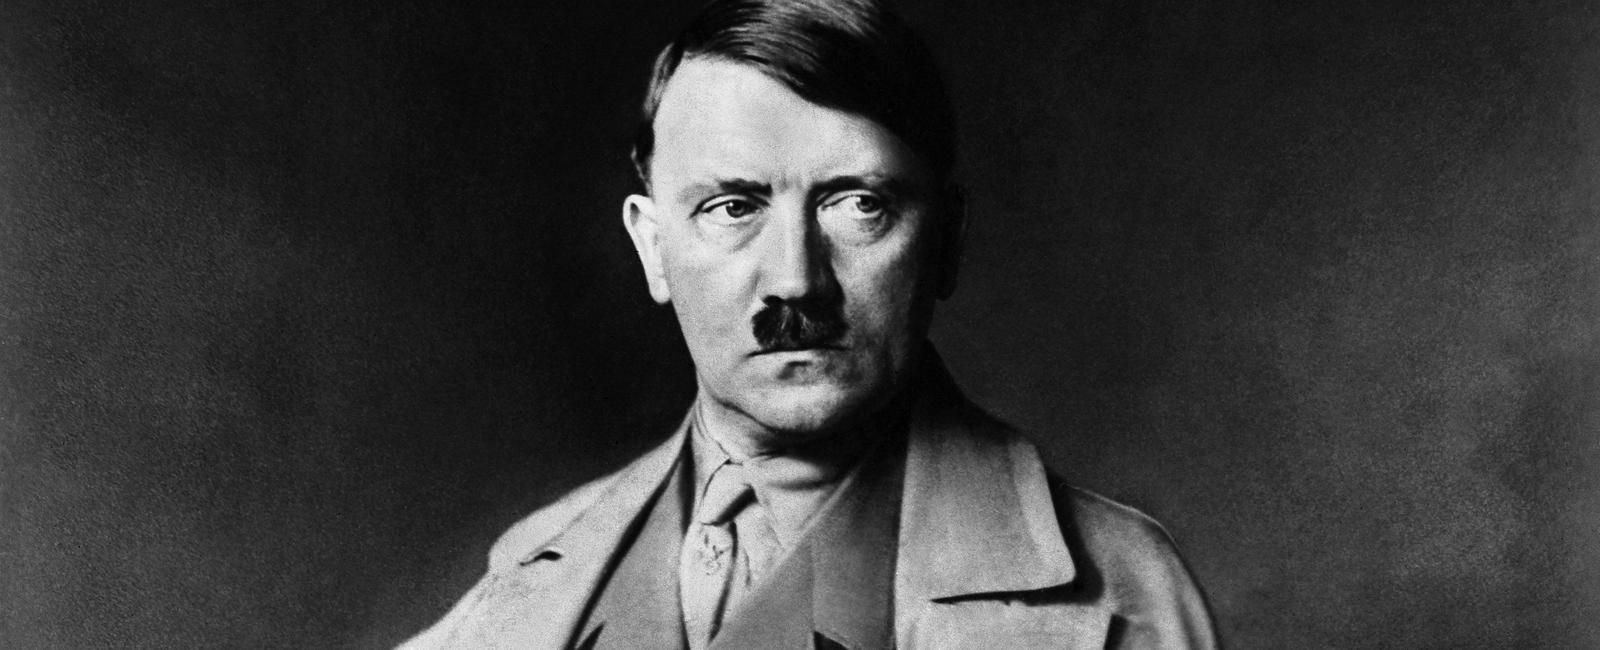 A 2018 study of hitler s teeth held in moscow claims to prove he died after taking cyanide and shooting himself in the head in 1945